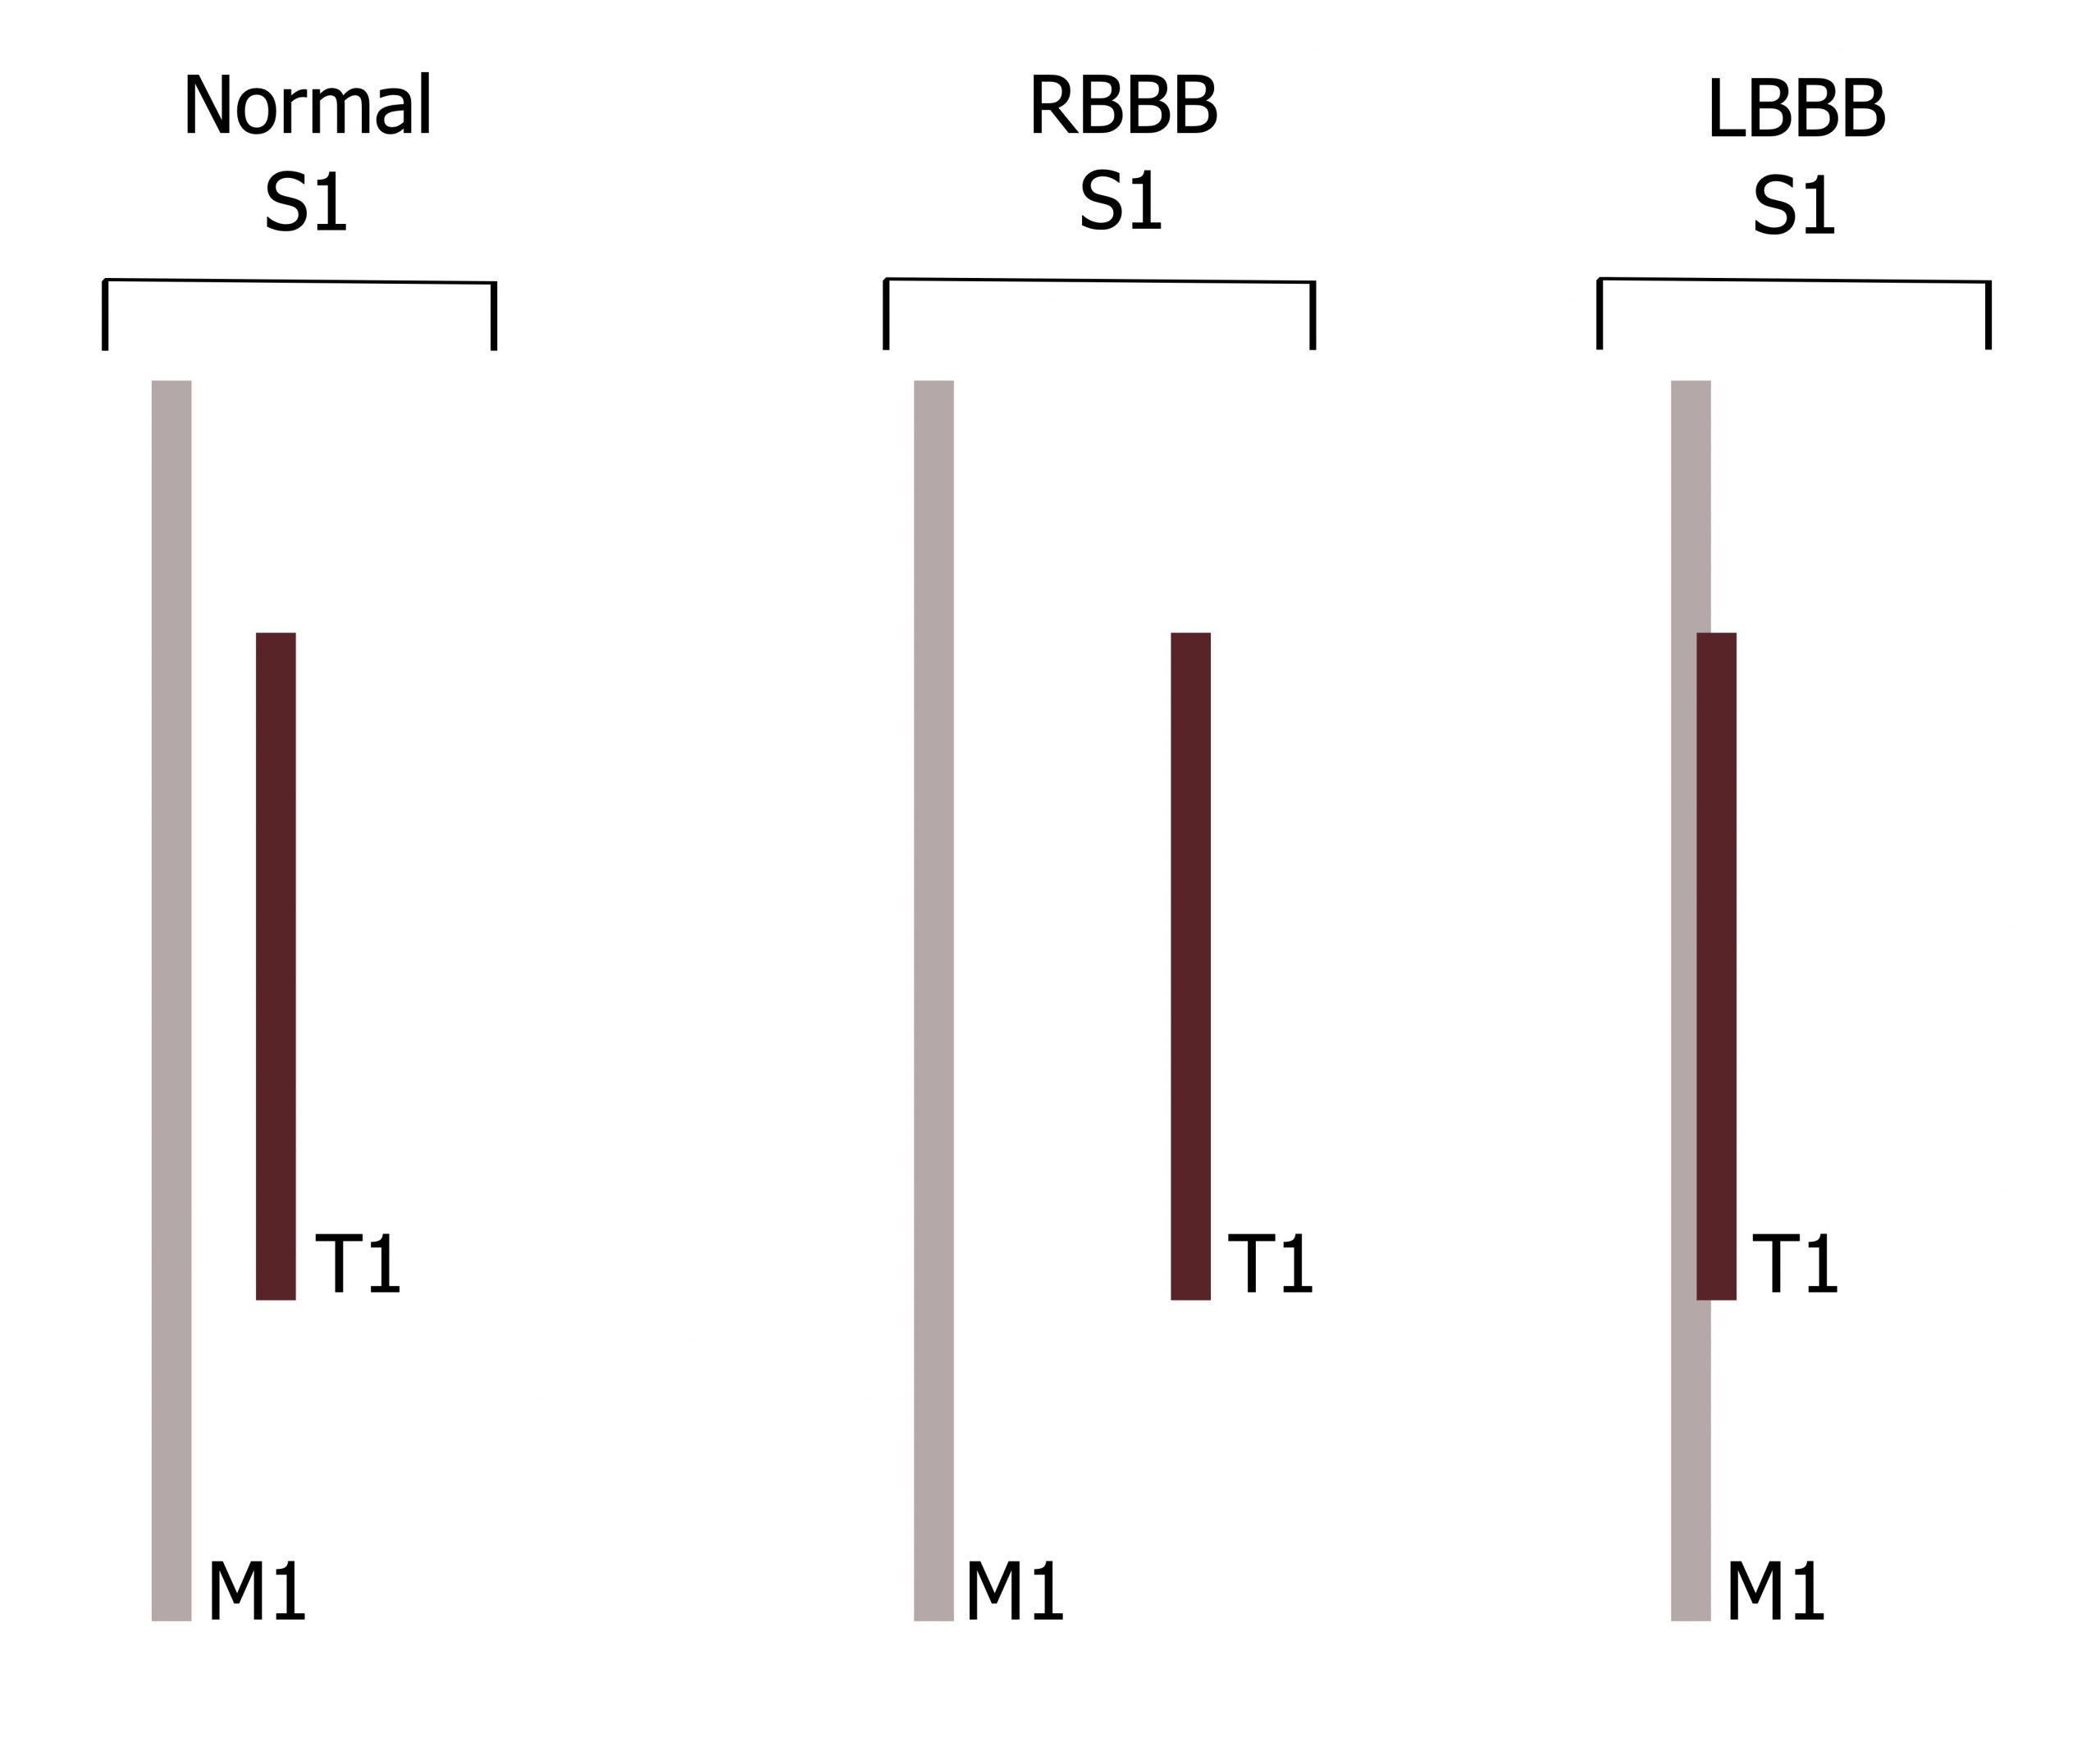 All figures include a large line labeled M1 and a line half the size labeled T1. Normal S1: T1 is centered above M1 with a small space between. RBBB: T1 is centered above M1 with a large space between. LBBB S1: T1 centered directly on top of M1